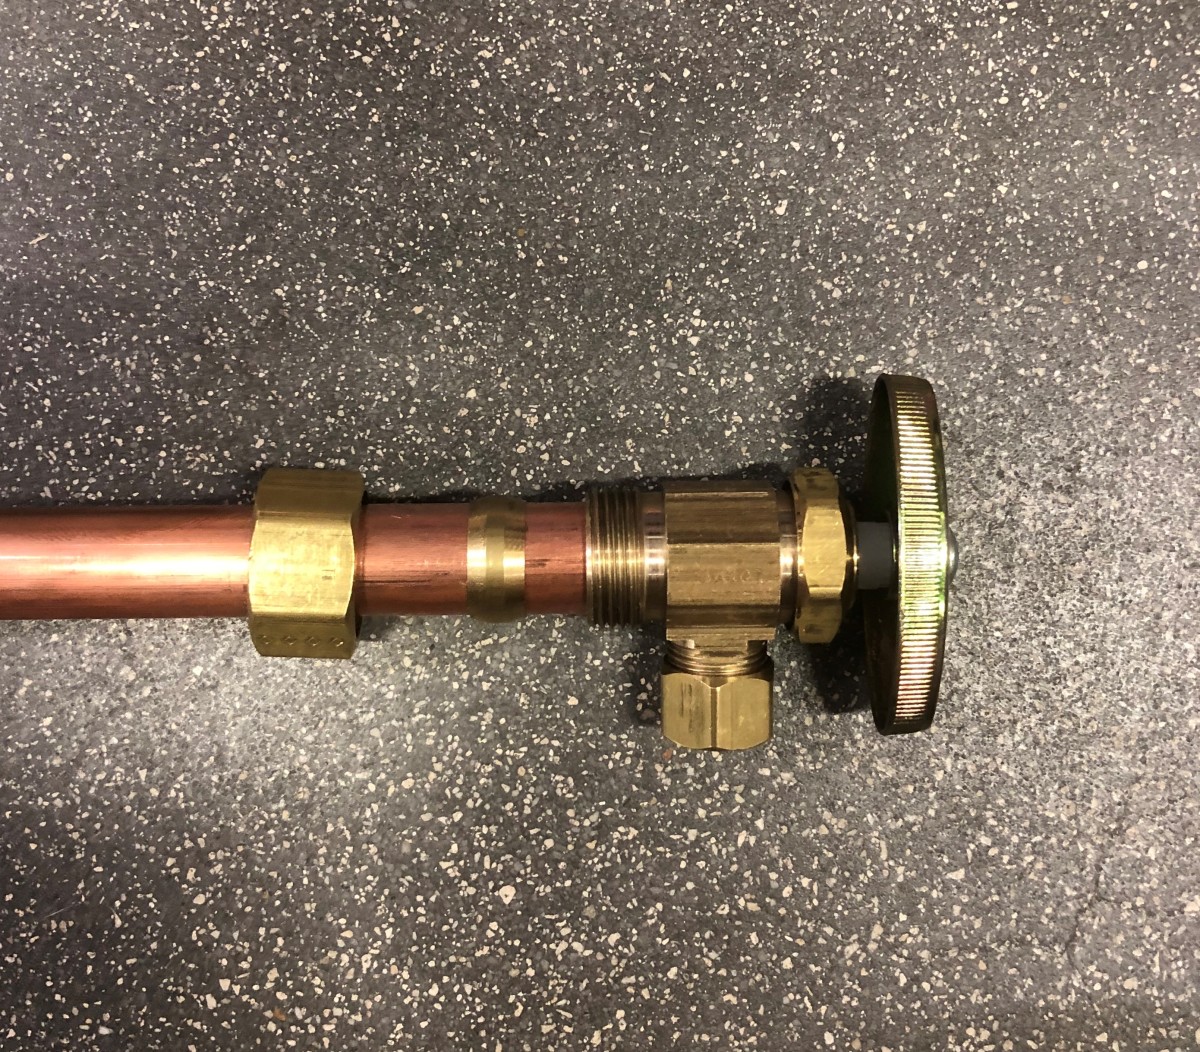 A compression-style angle stop valve